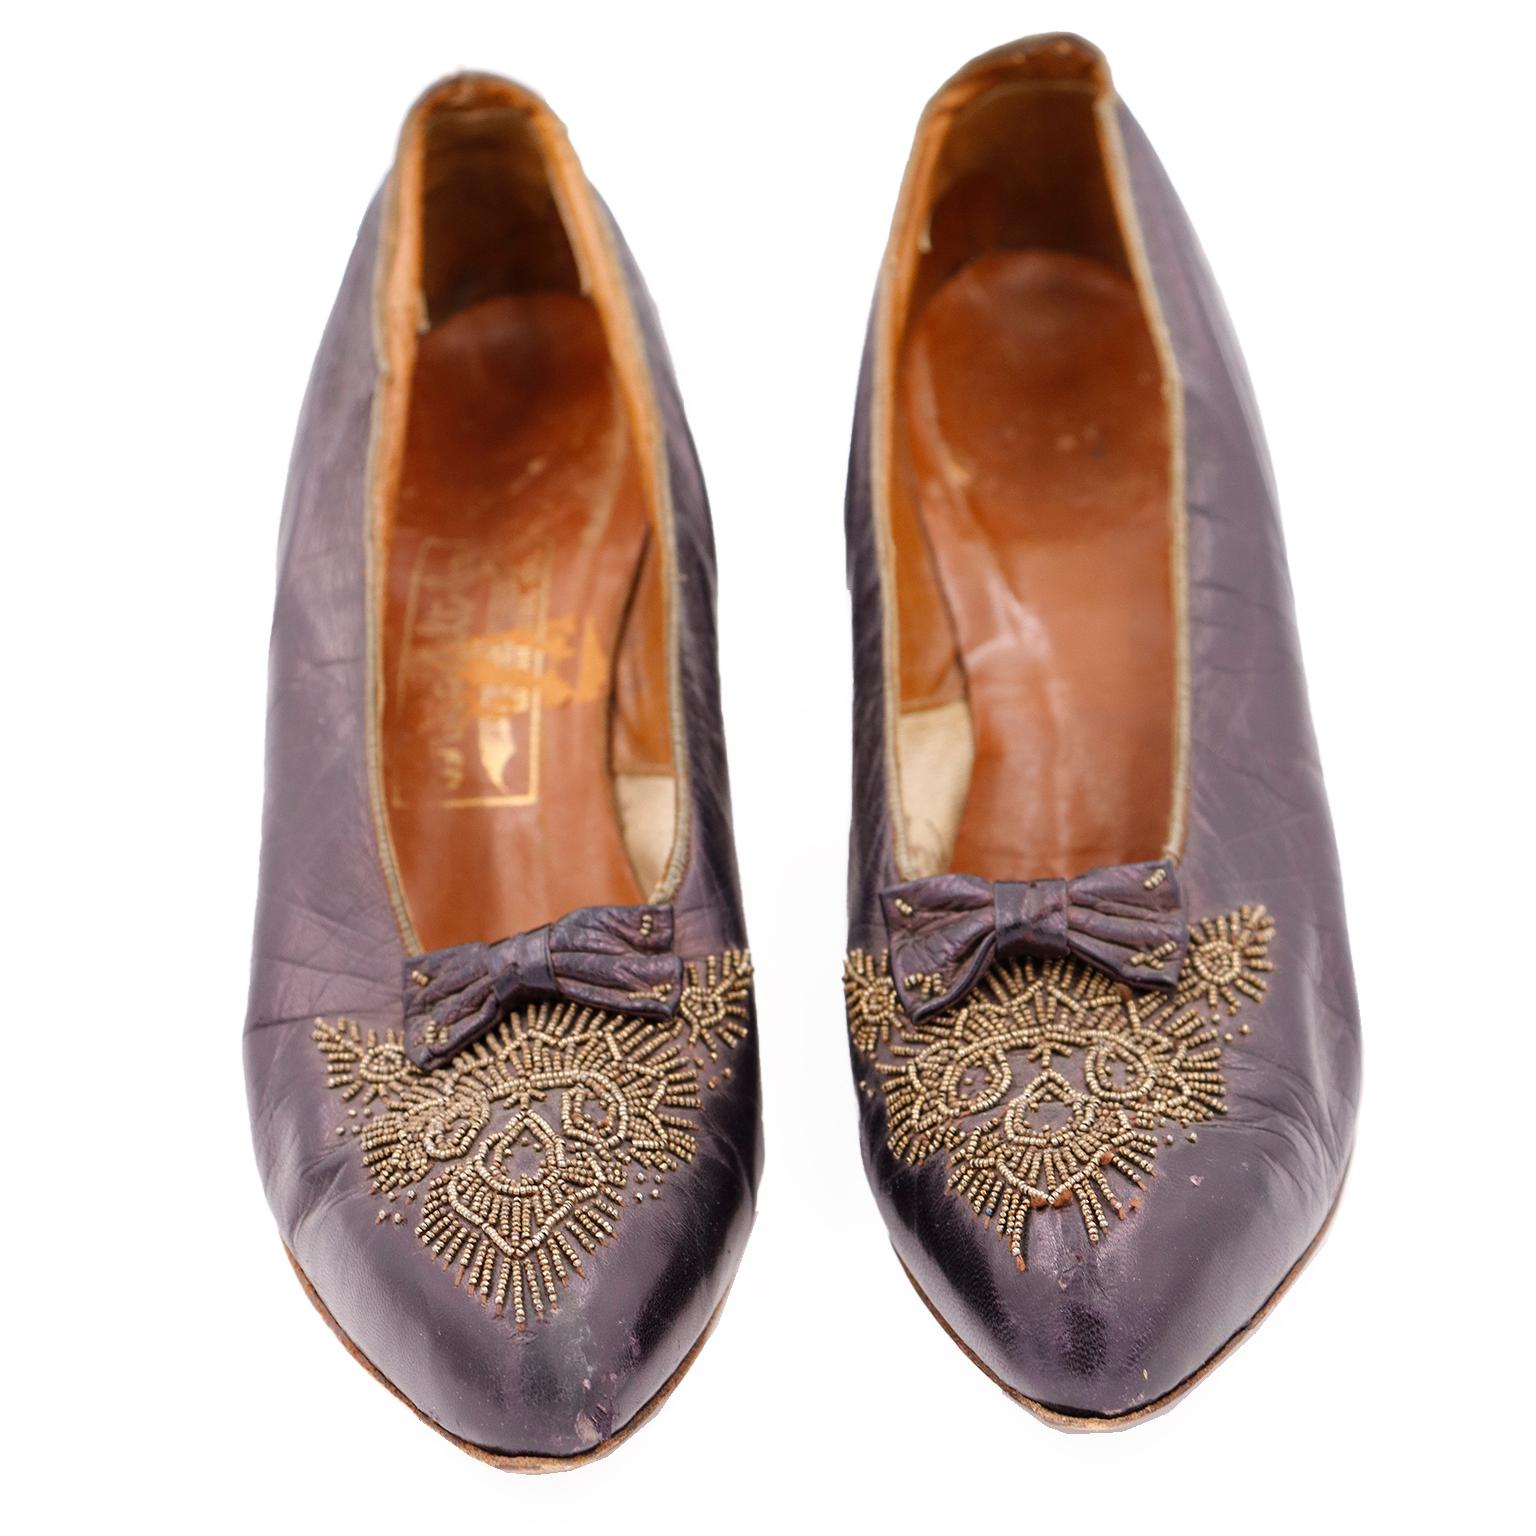 This is a rare pair of vintage 1910's purple leather beaded shoes from CH Wolfelt Co. The Bootery - Los Angeles, CAL.
These pretty Edwardian heels have lovely gold steel beads on the vamp and small beaded bows. The intricate beading creates a